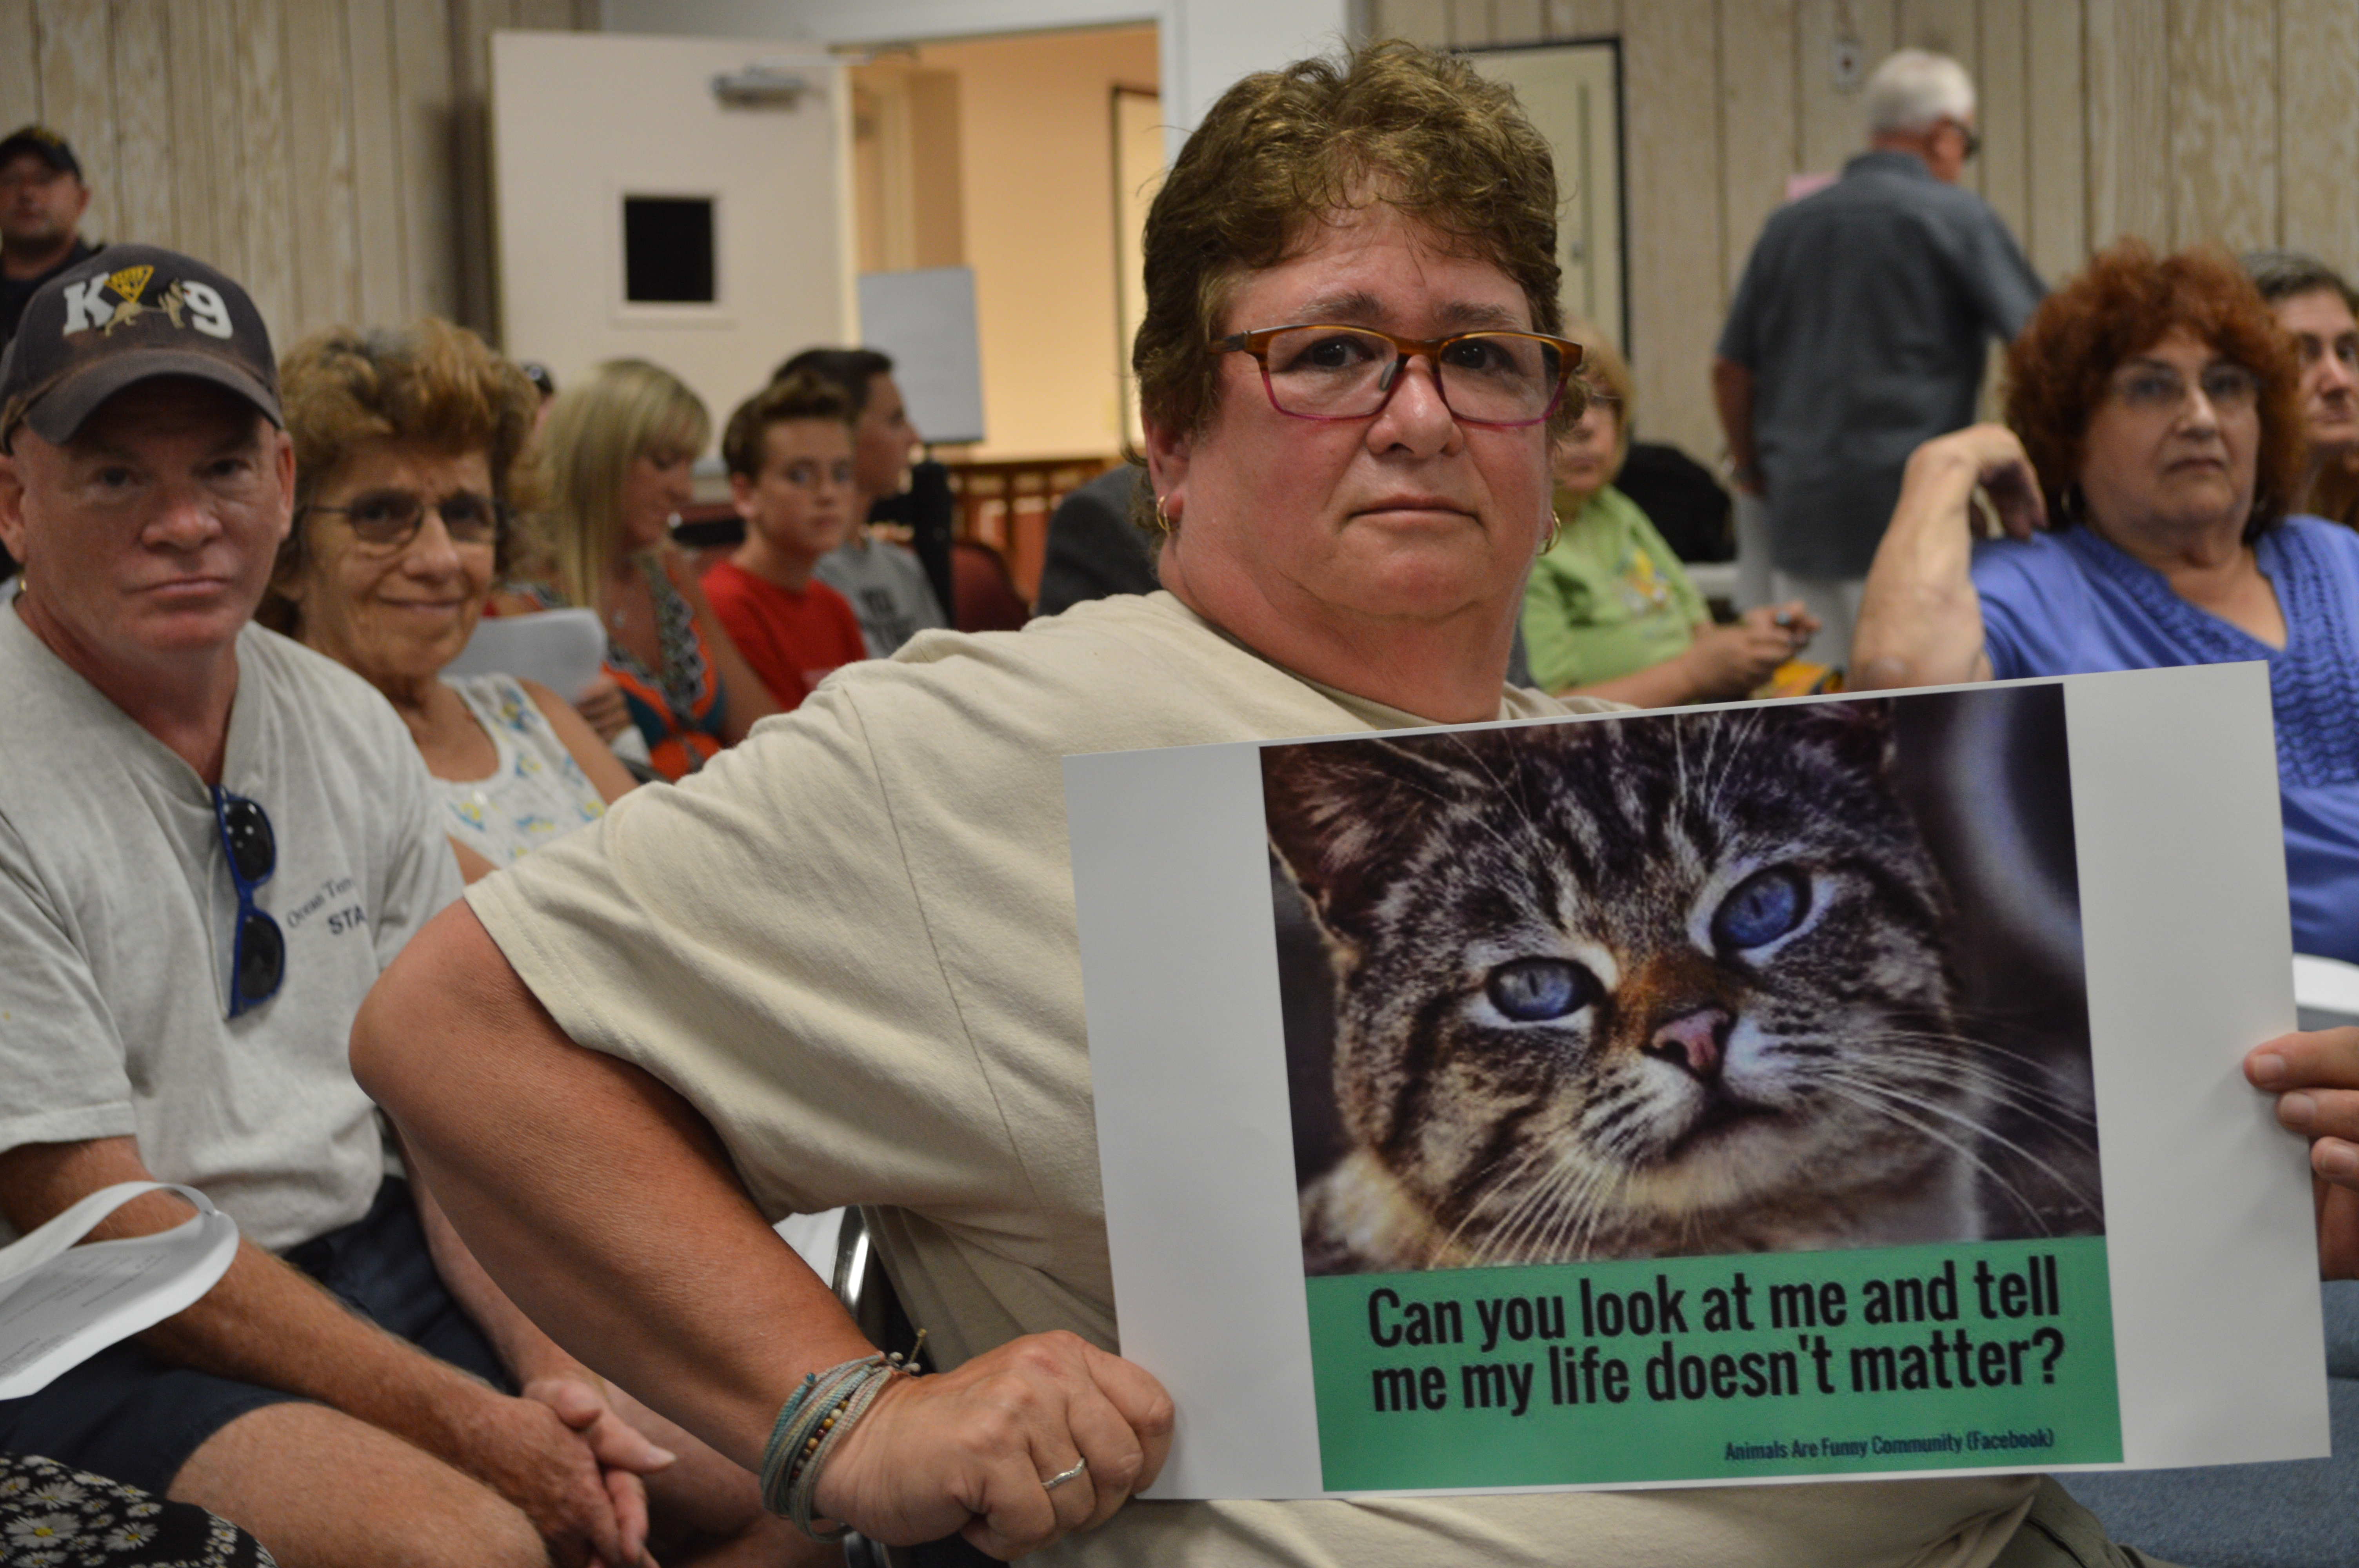 A protester at the Seaside Heights council meeting, July 20, 2016. (Photo: Daniel Nee)